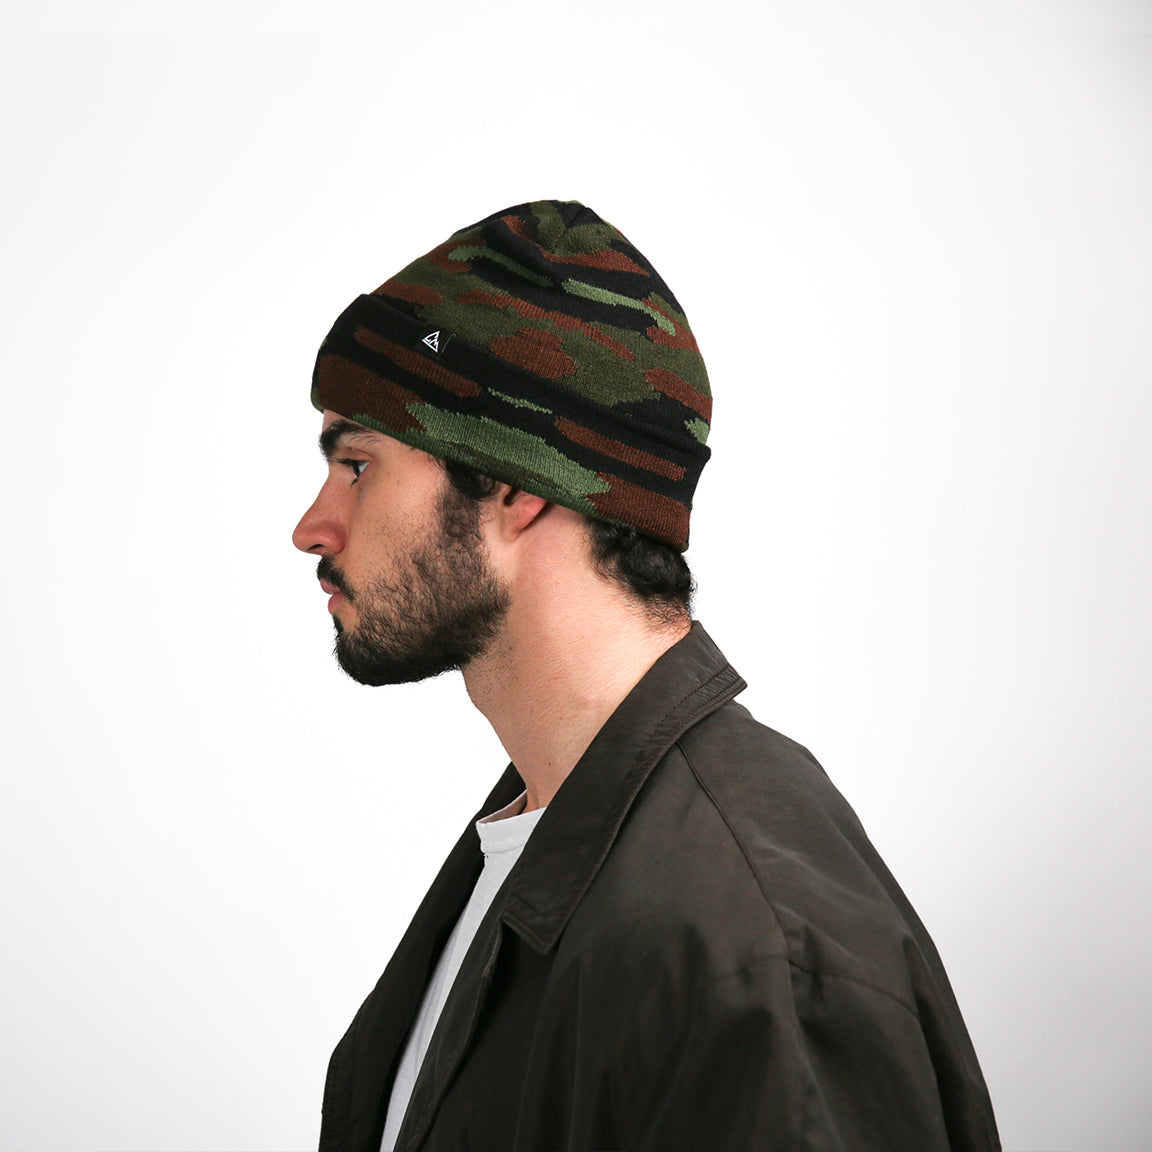 This side view shows the same beanie, where the black stripe encircles the hat, contrasting with the camouflage pattern. The black logo is positioned just above the stripe. The beanie conforms to the head's shape, with a gentle slouch evident at the back.